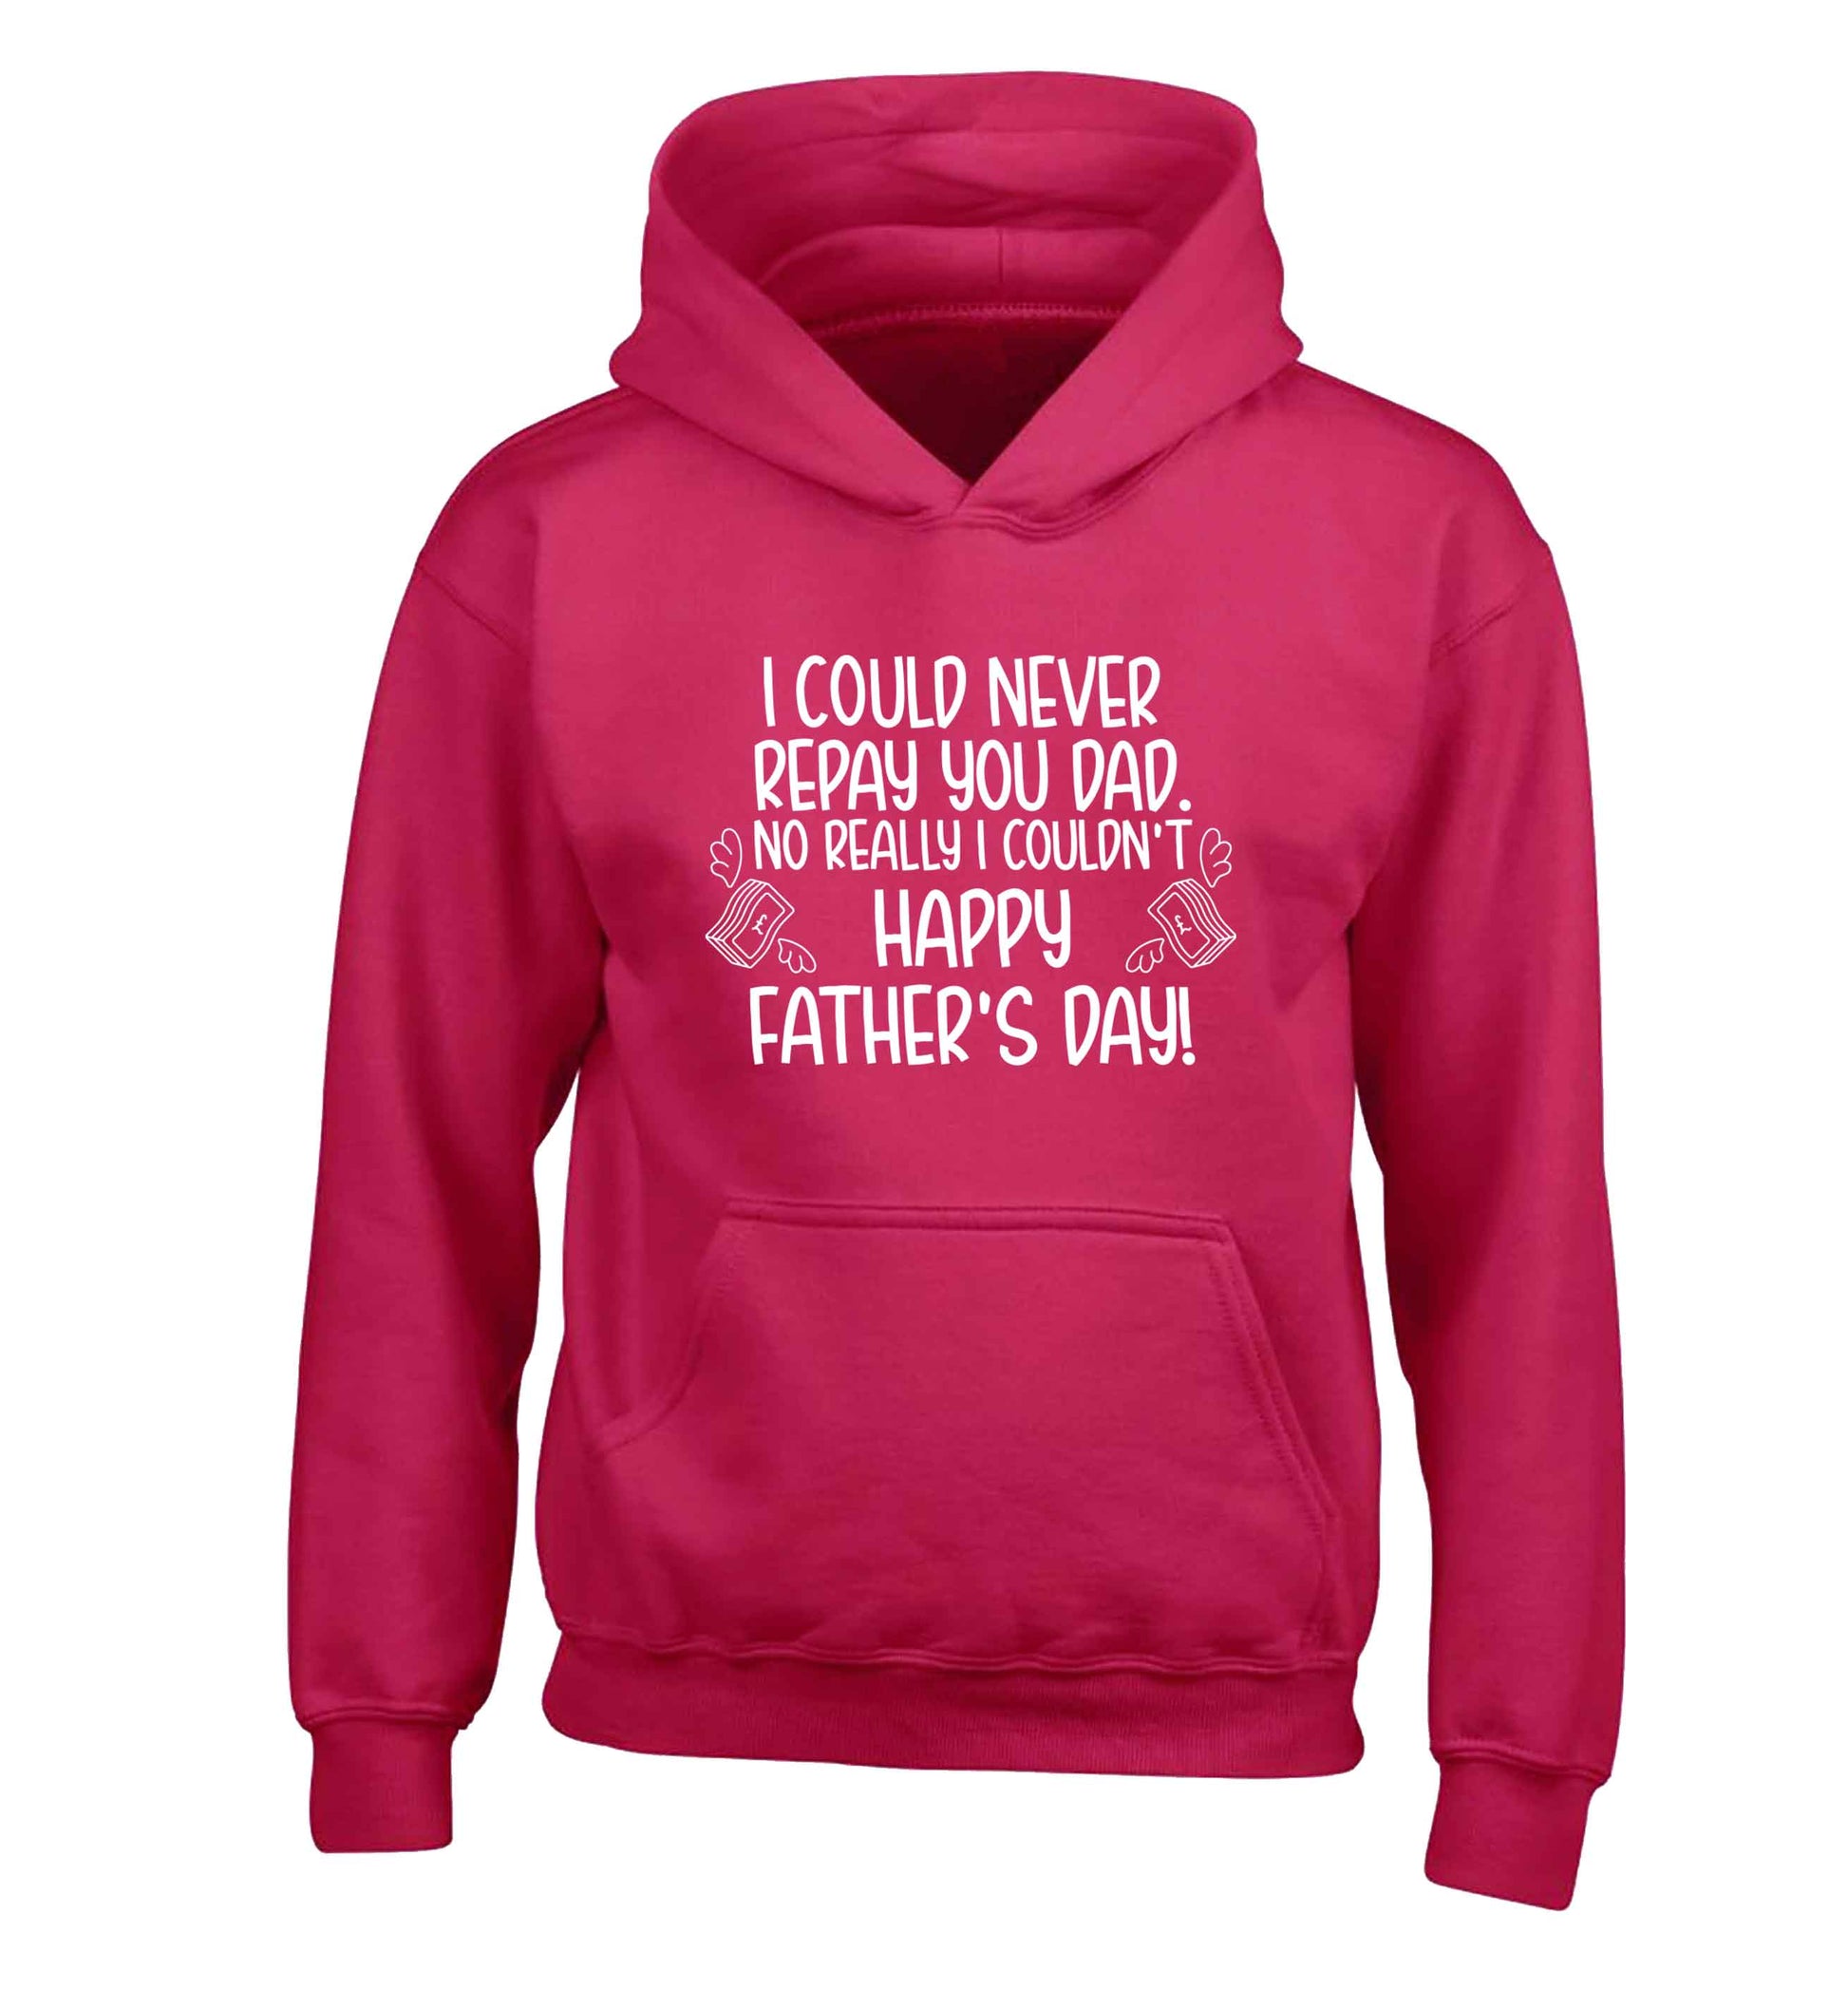 I could never repay you dad. No I really couldn't happy Father's day! children's pink hoodie 12-13 Years